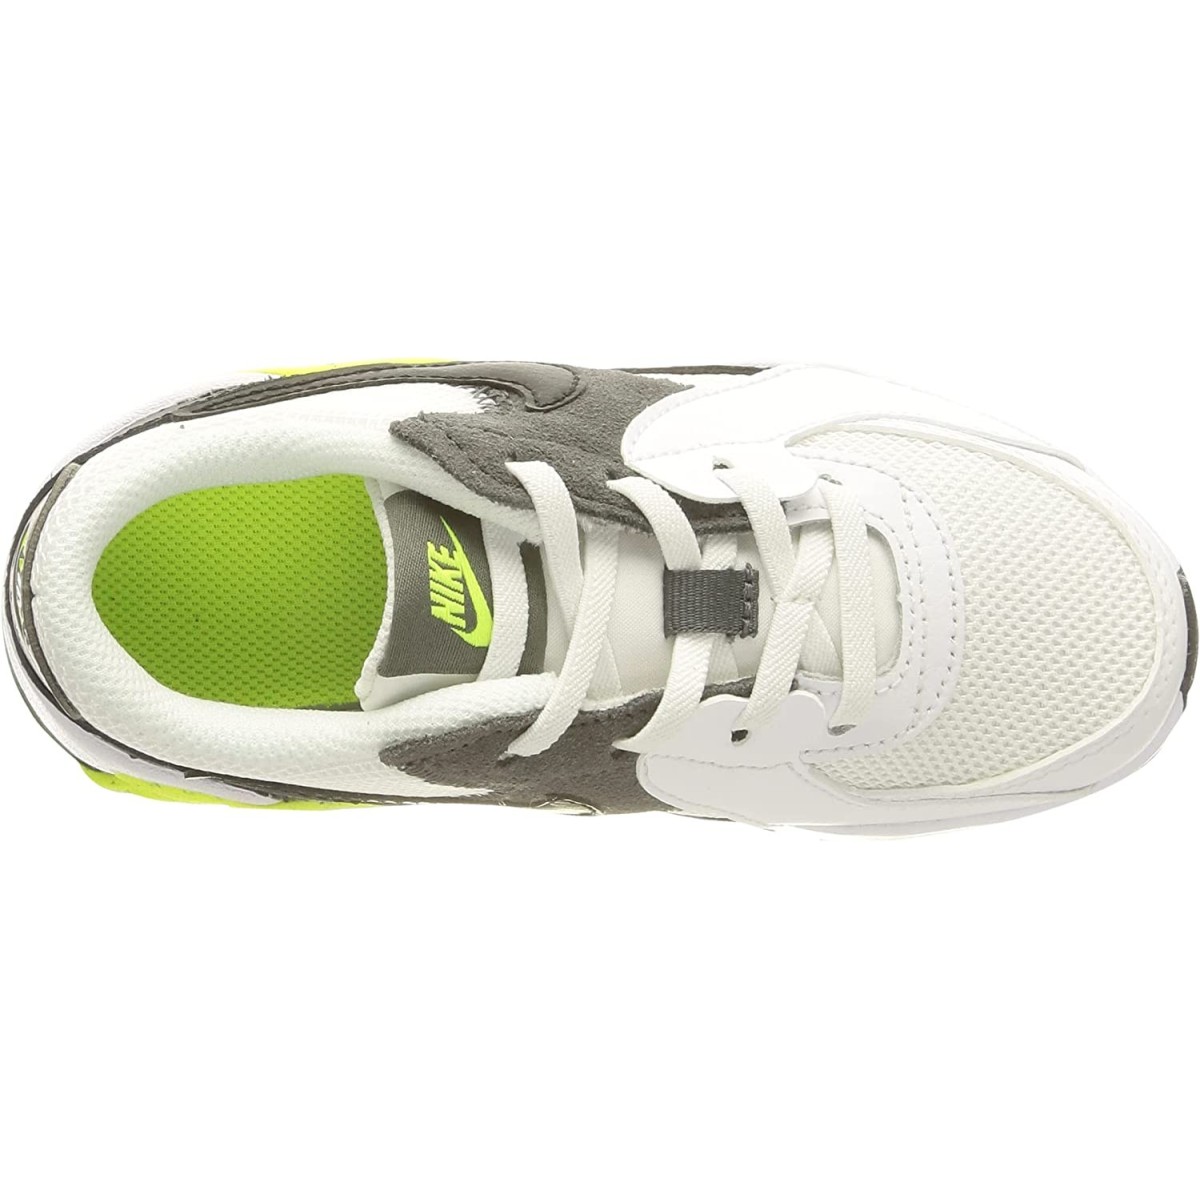 (PS) EXCEE NIKE grey-volt CD6892 AIR white/black-iron 110 Shoes MAX